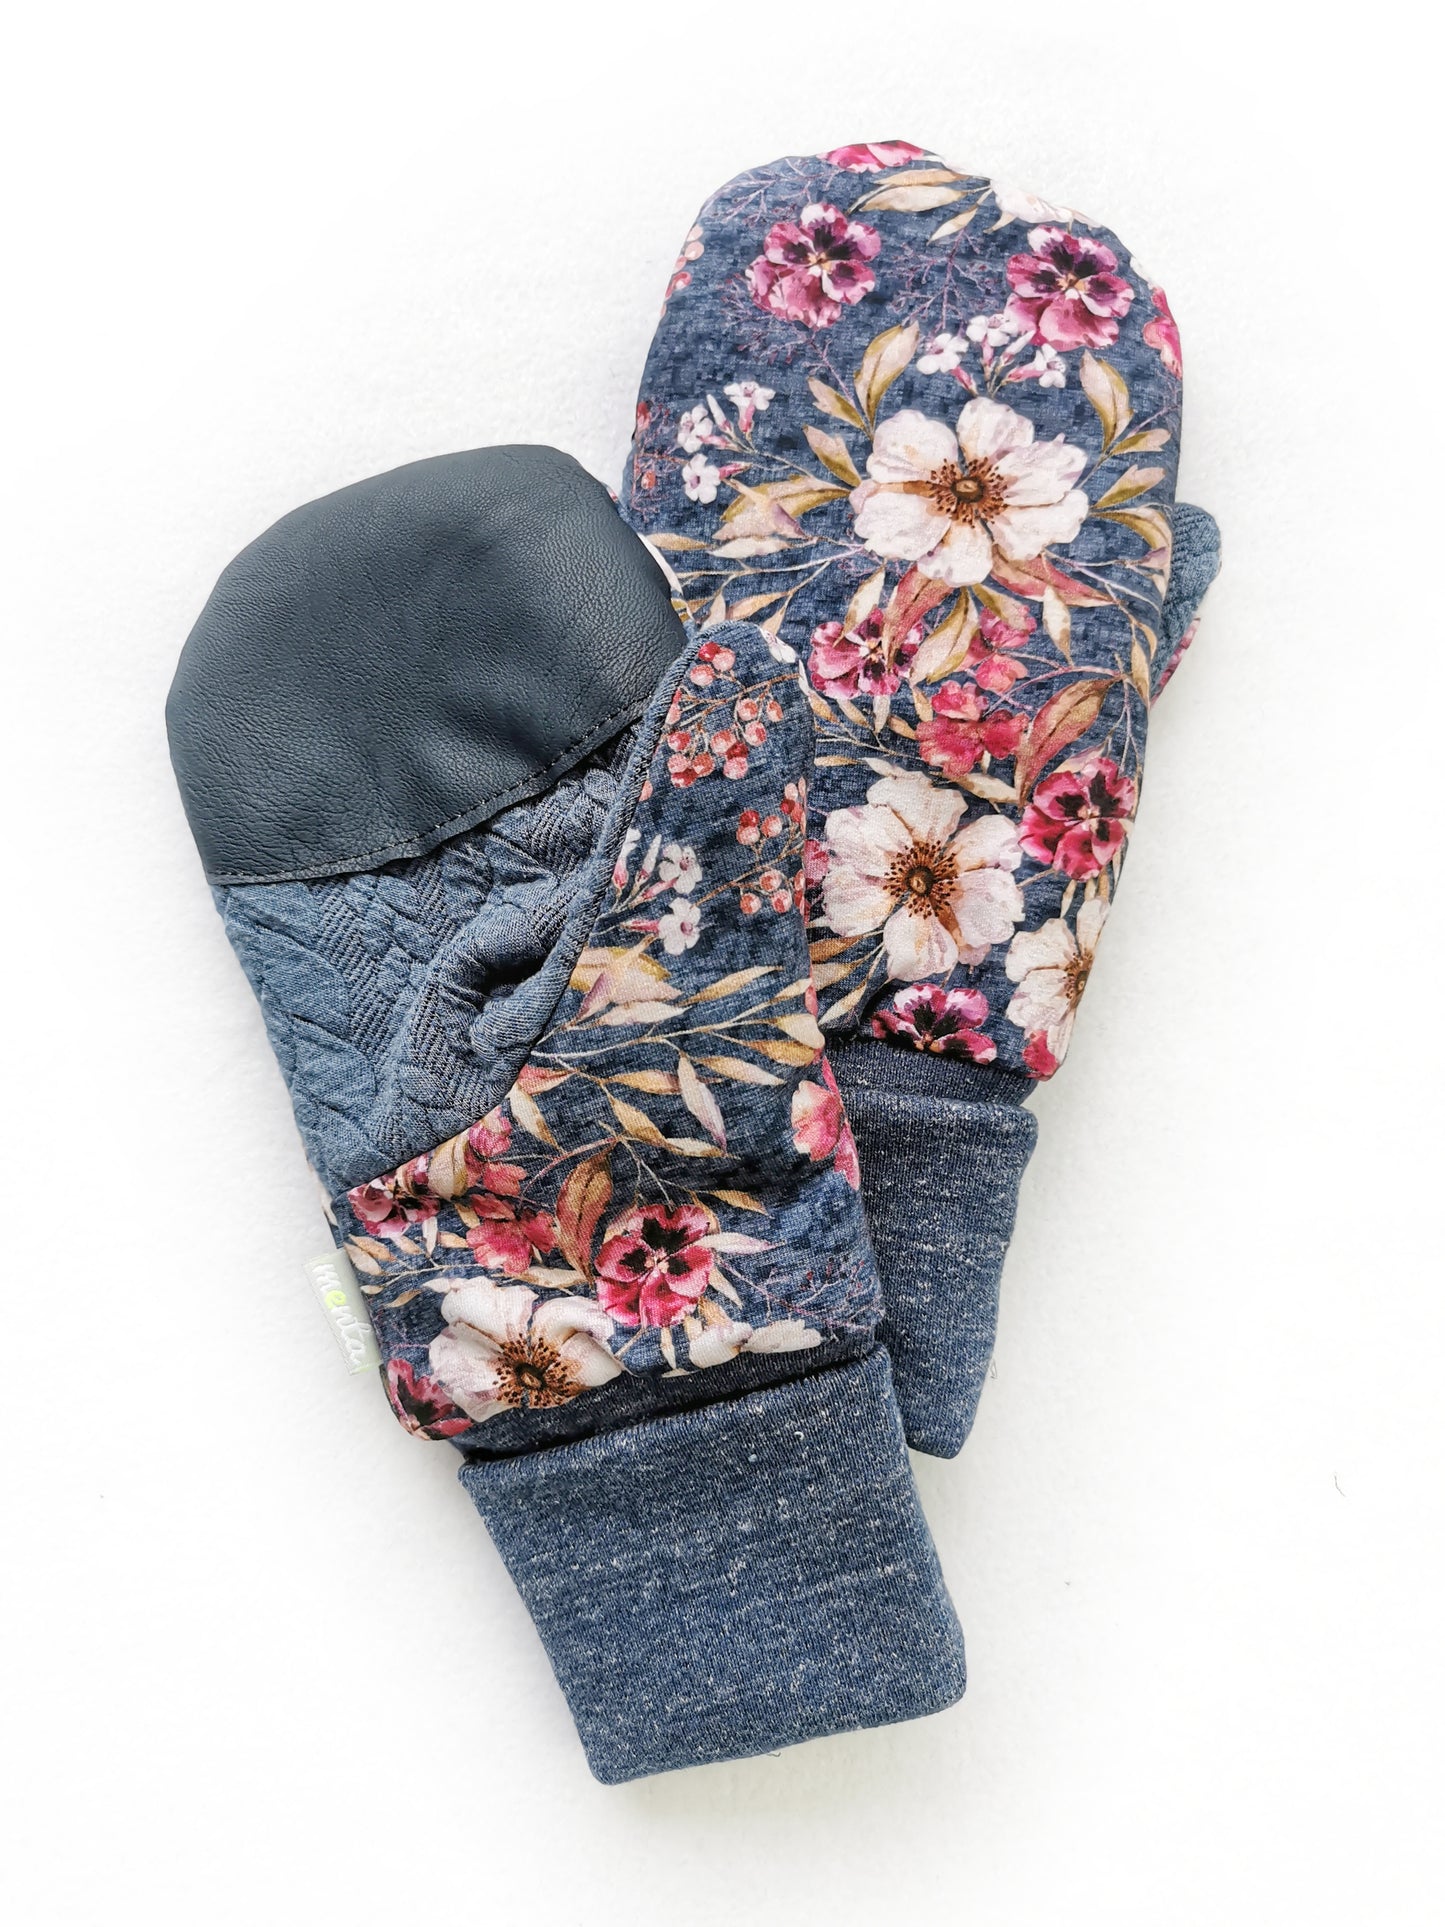 BIG Overall Menta Mittens (adult)